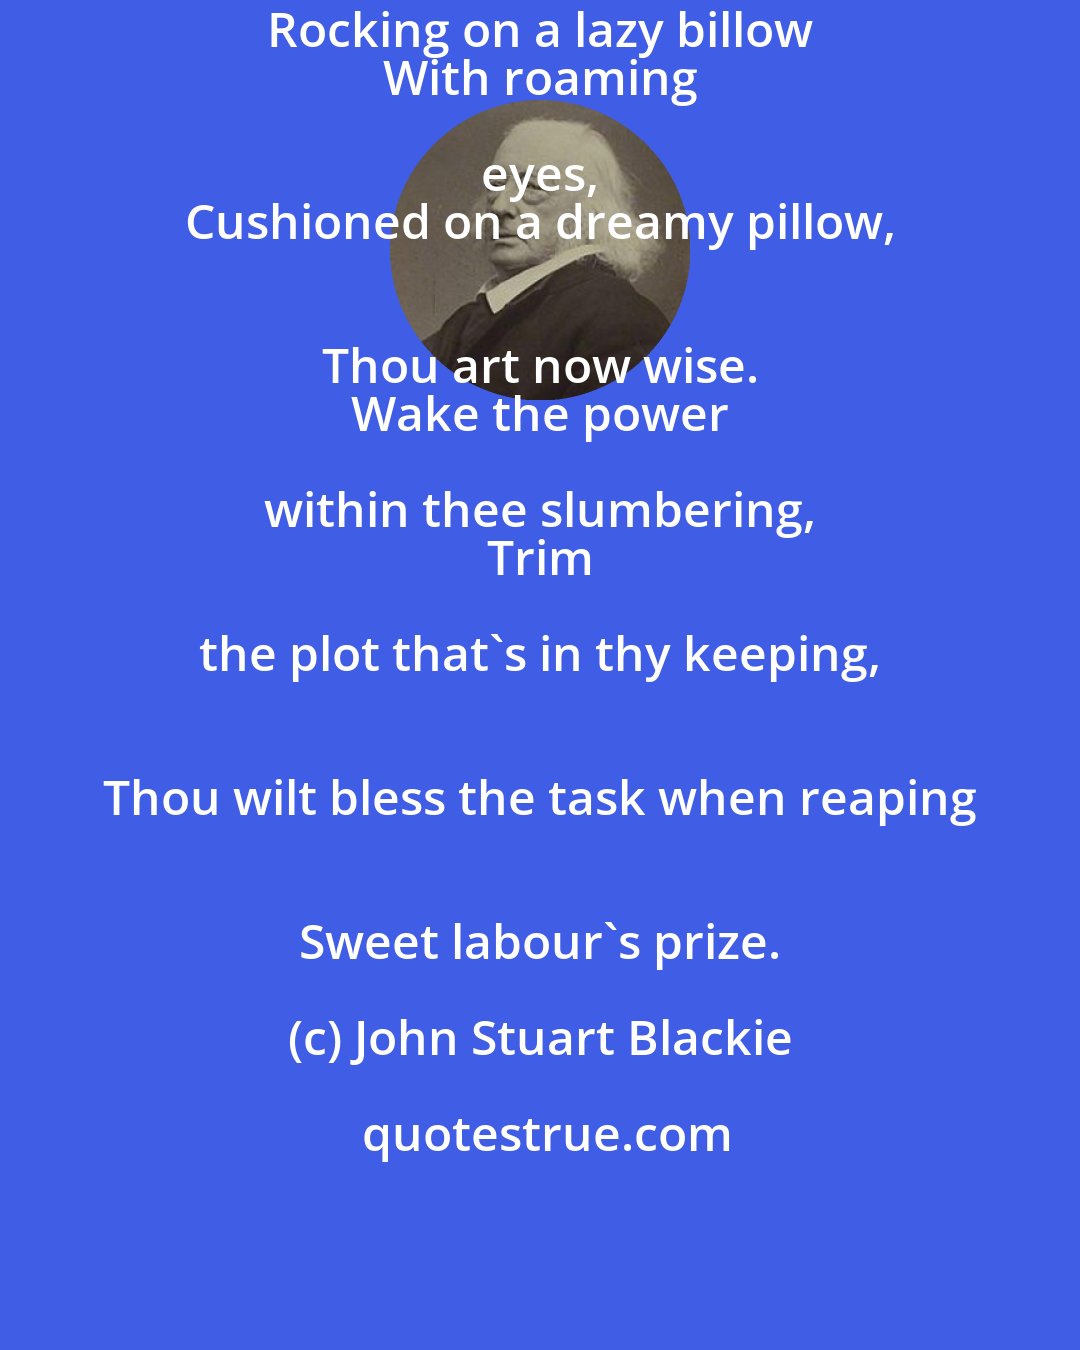 John Stuart Blackie: Rocking on a lazy billow 
 With roaming eyes, 
 Cushioned on a dreamy pillow, 
 Thou art now wise. 
 Wake the power within thee slumbering, 
 Trim the plot that's in thy keeping, 
 Thou wilt bless the task when reaping 
 Sweet labour's prize.